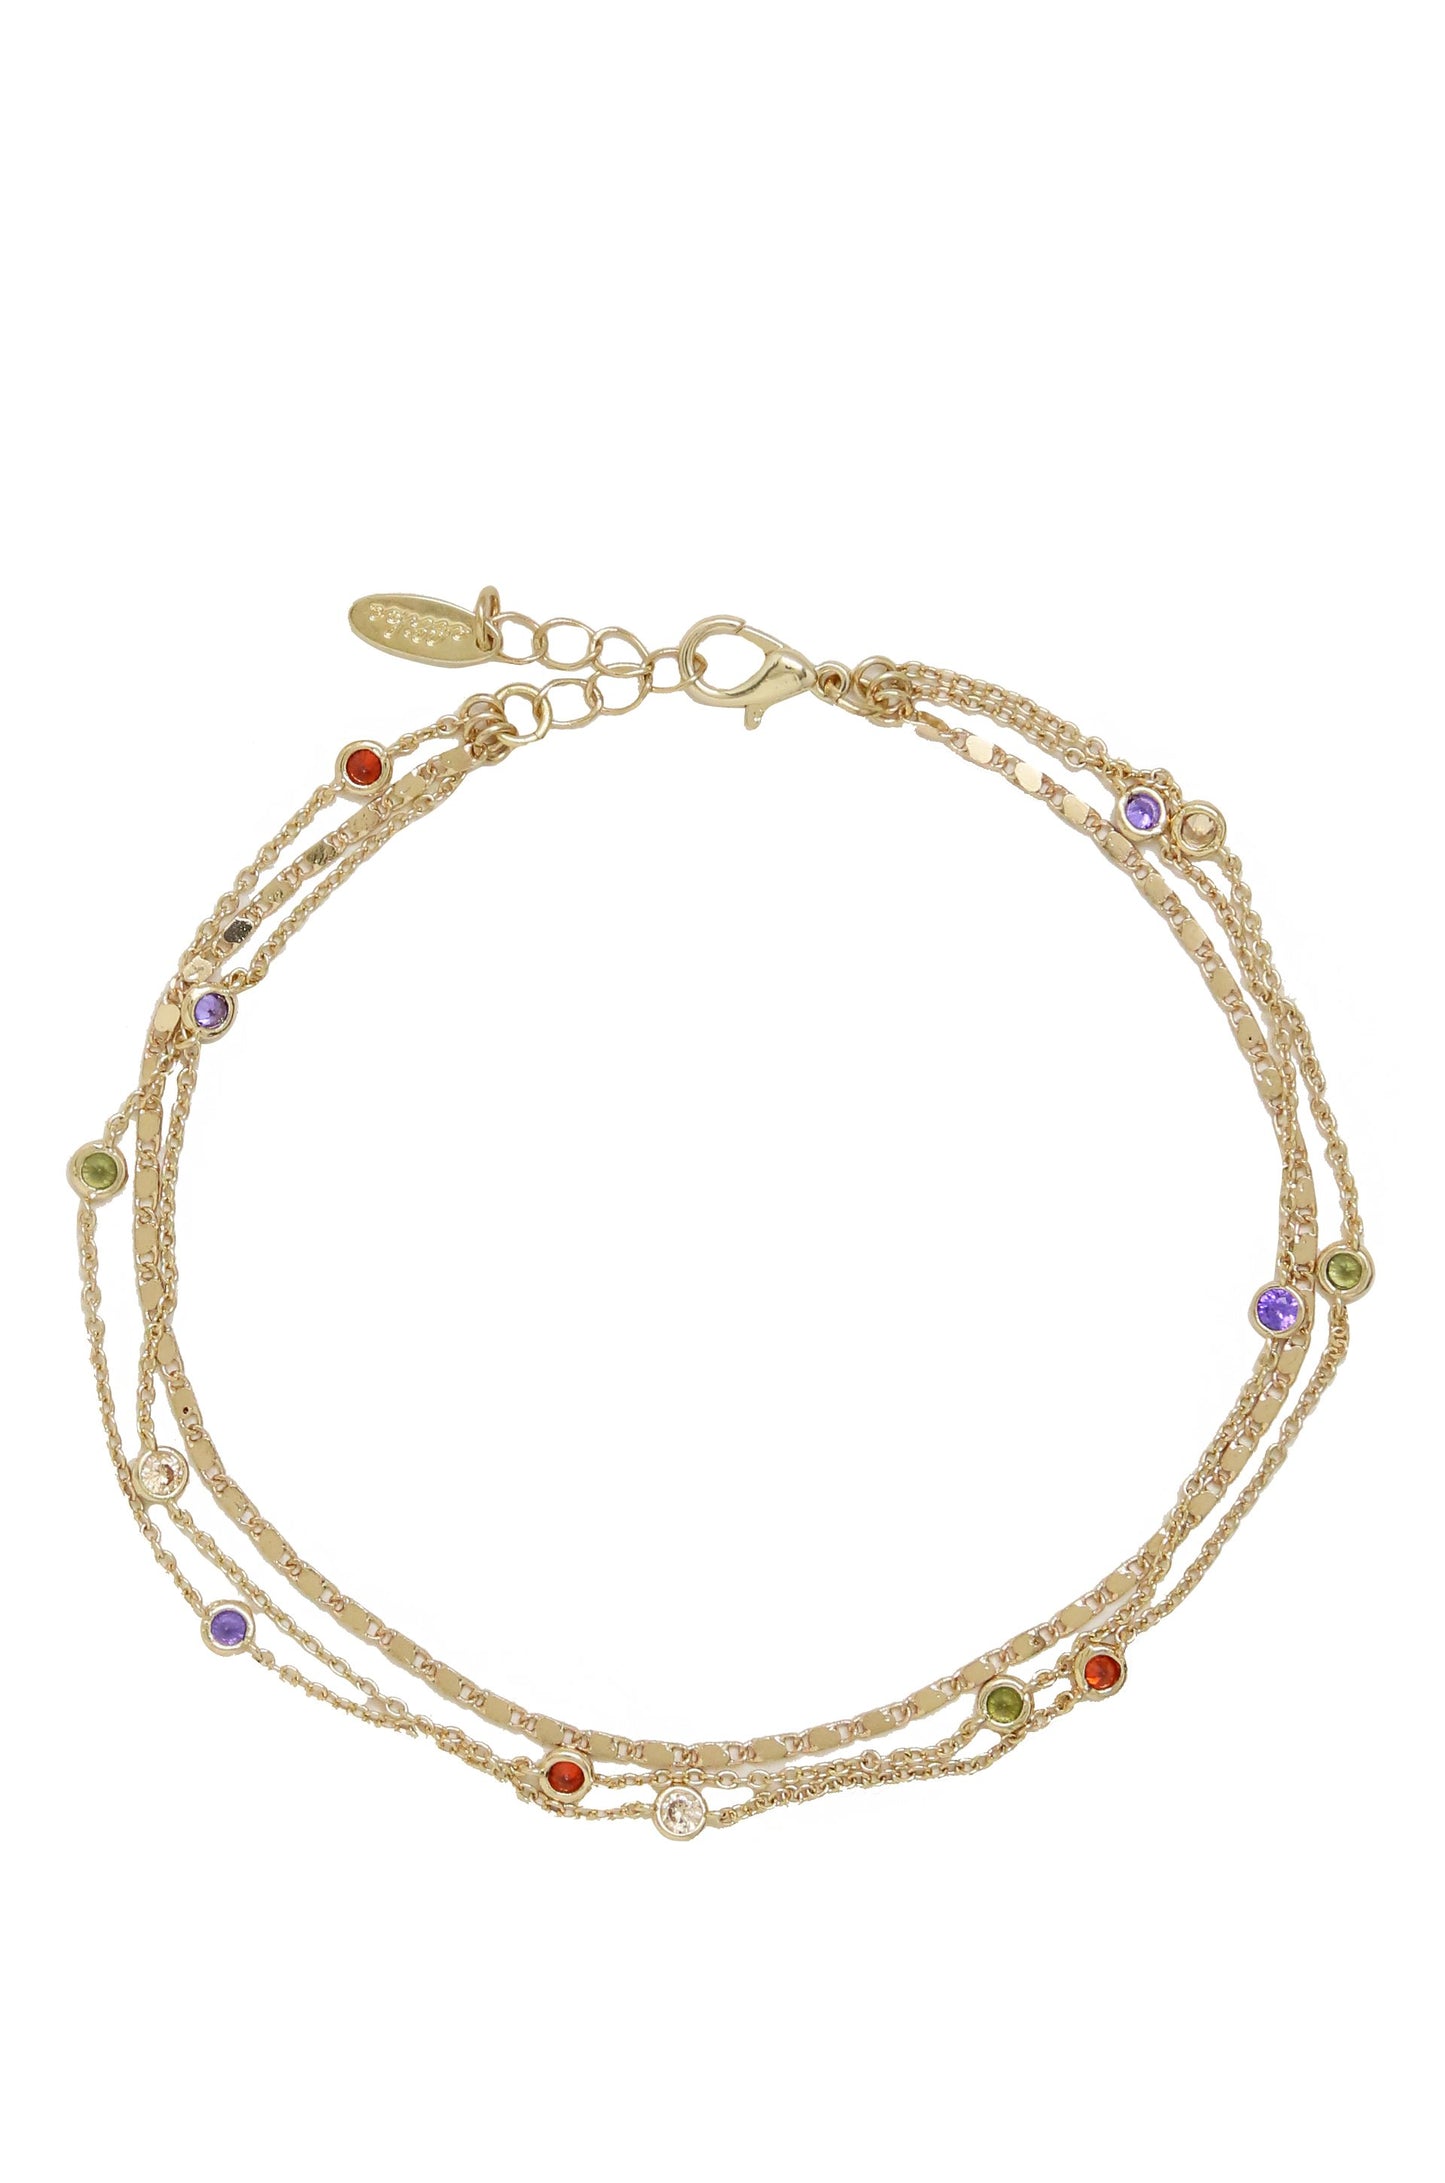 Over the Rainbow Multi-Chain Crystal Anklet on white background